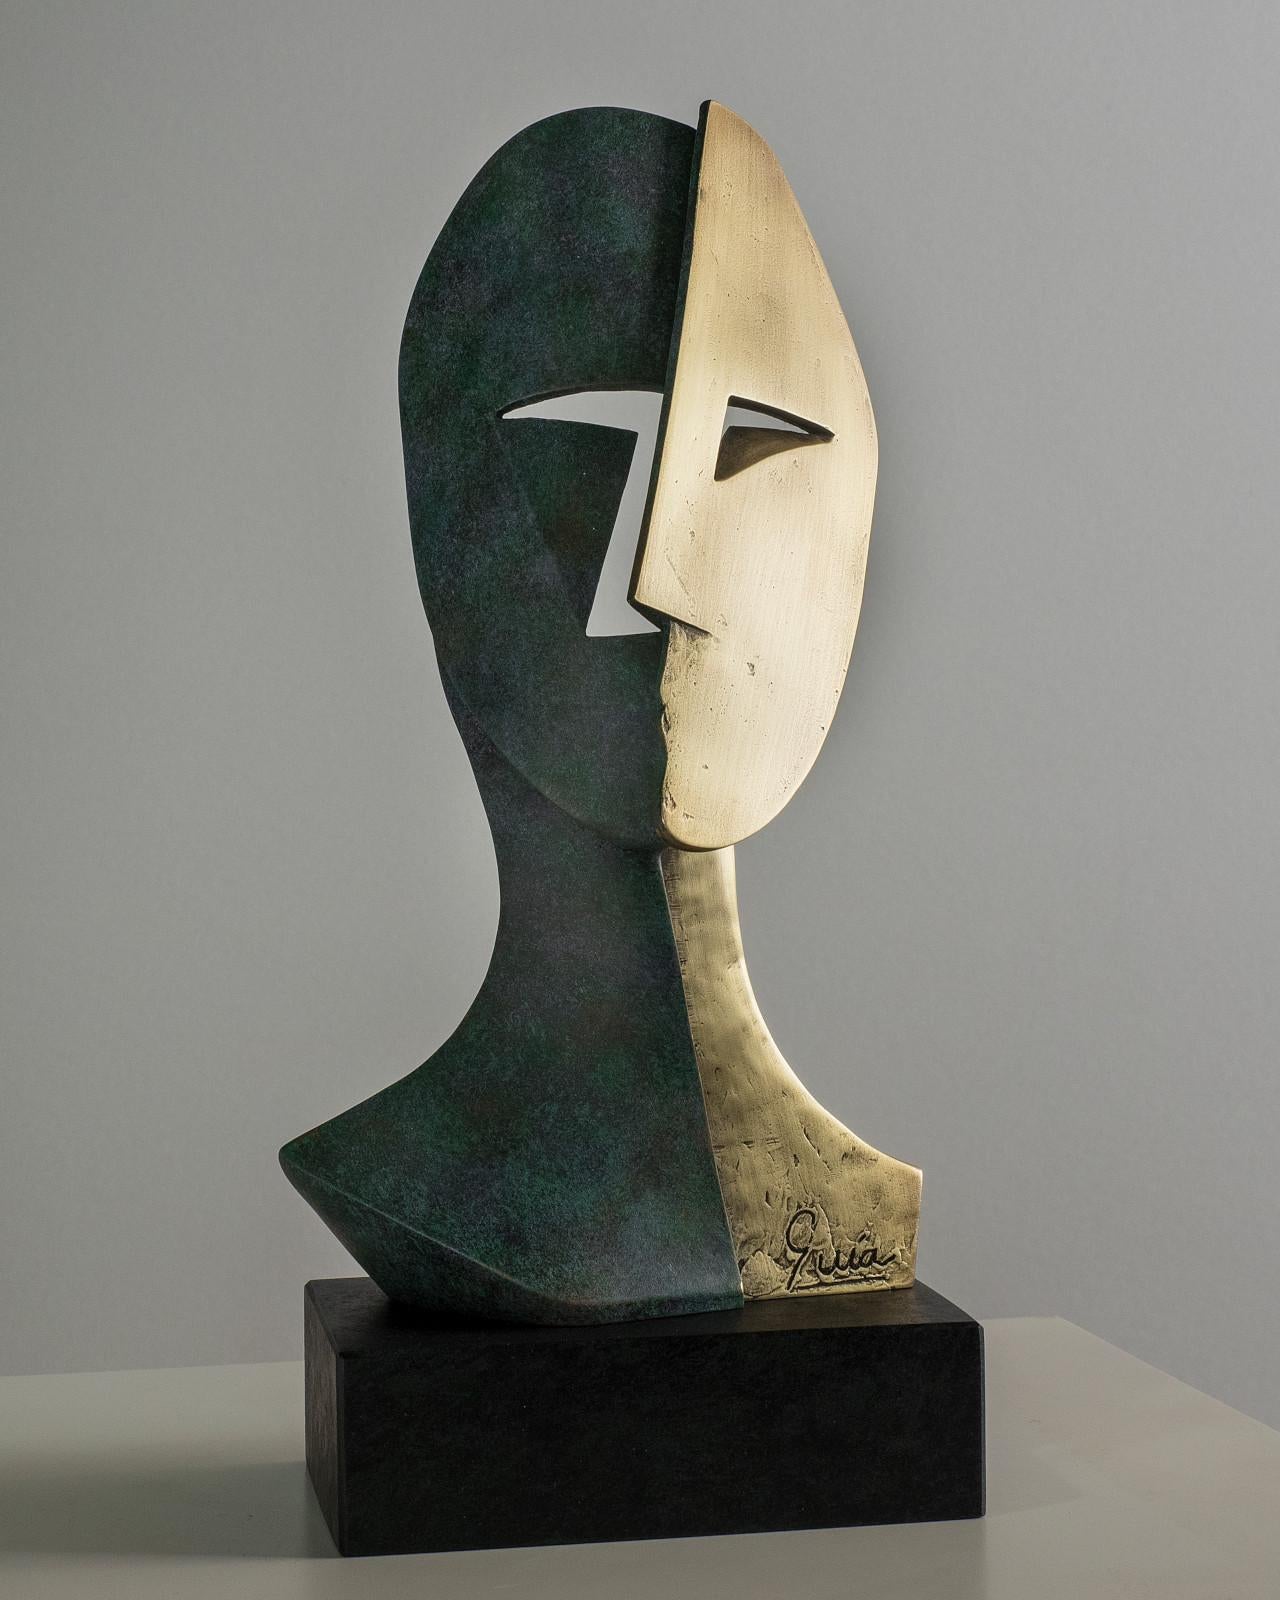 Cubist Sculpture "Big Cubiste Mask" by Miguel Guía.
The sculpture is made of a layer of bronze on cold smelting of copper with the base of graphite or marble dust.
Limited edition of 150 works.
Although the required time to deliver a shipment is